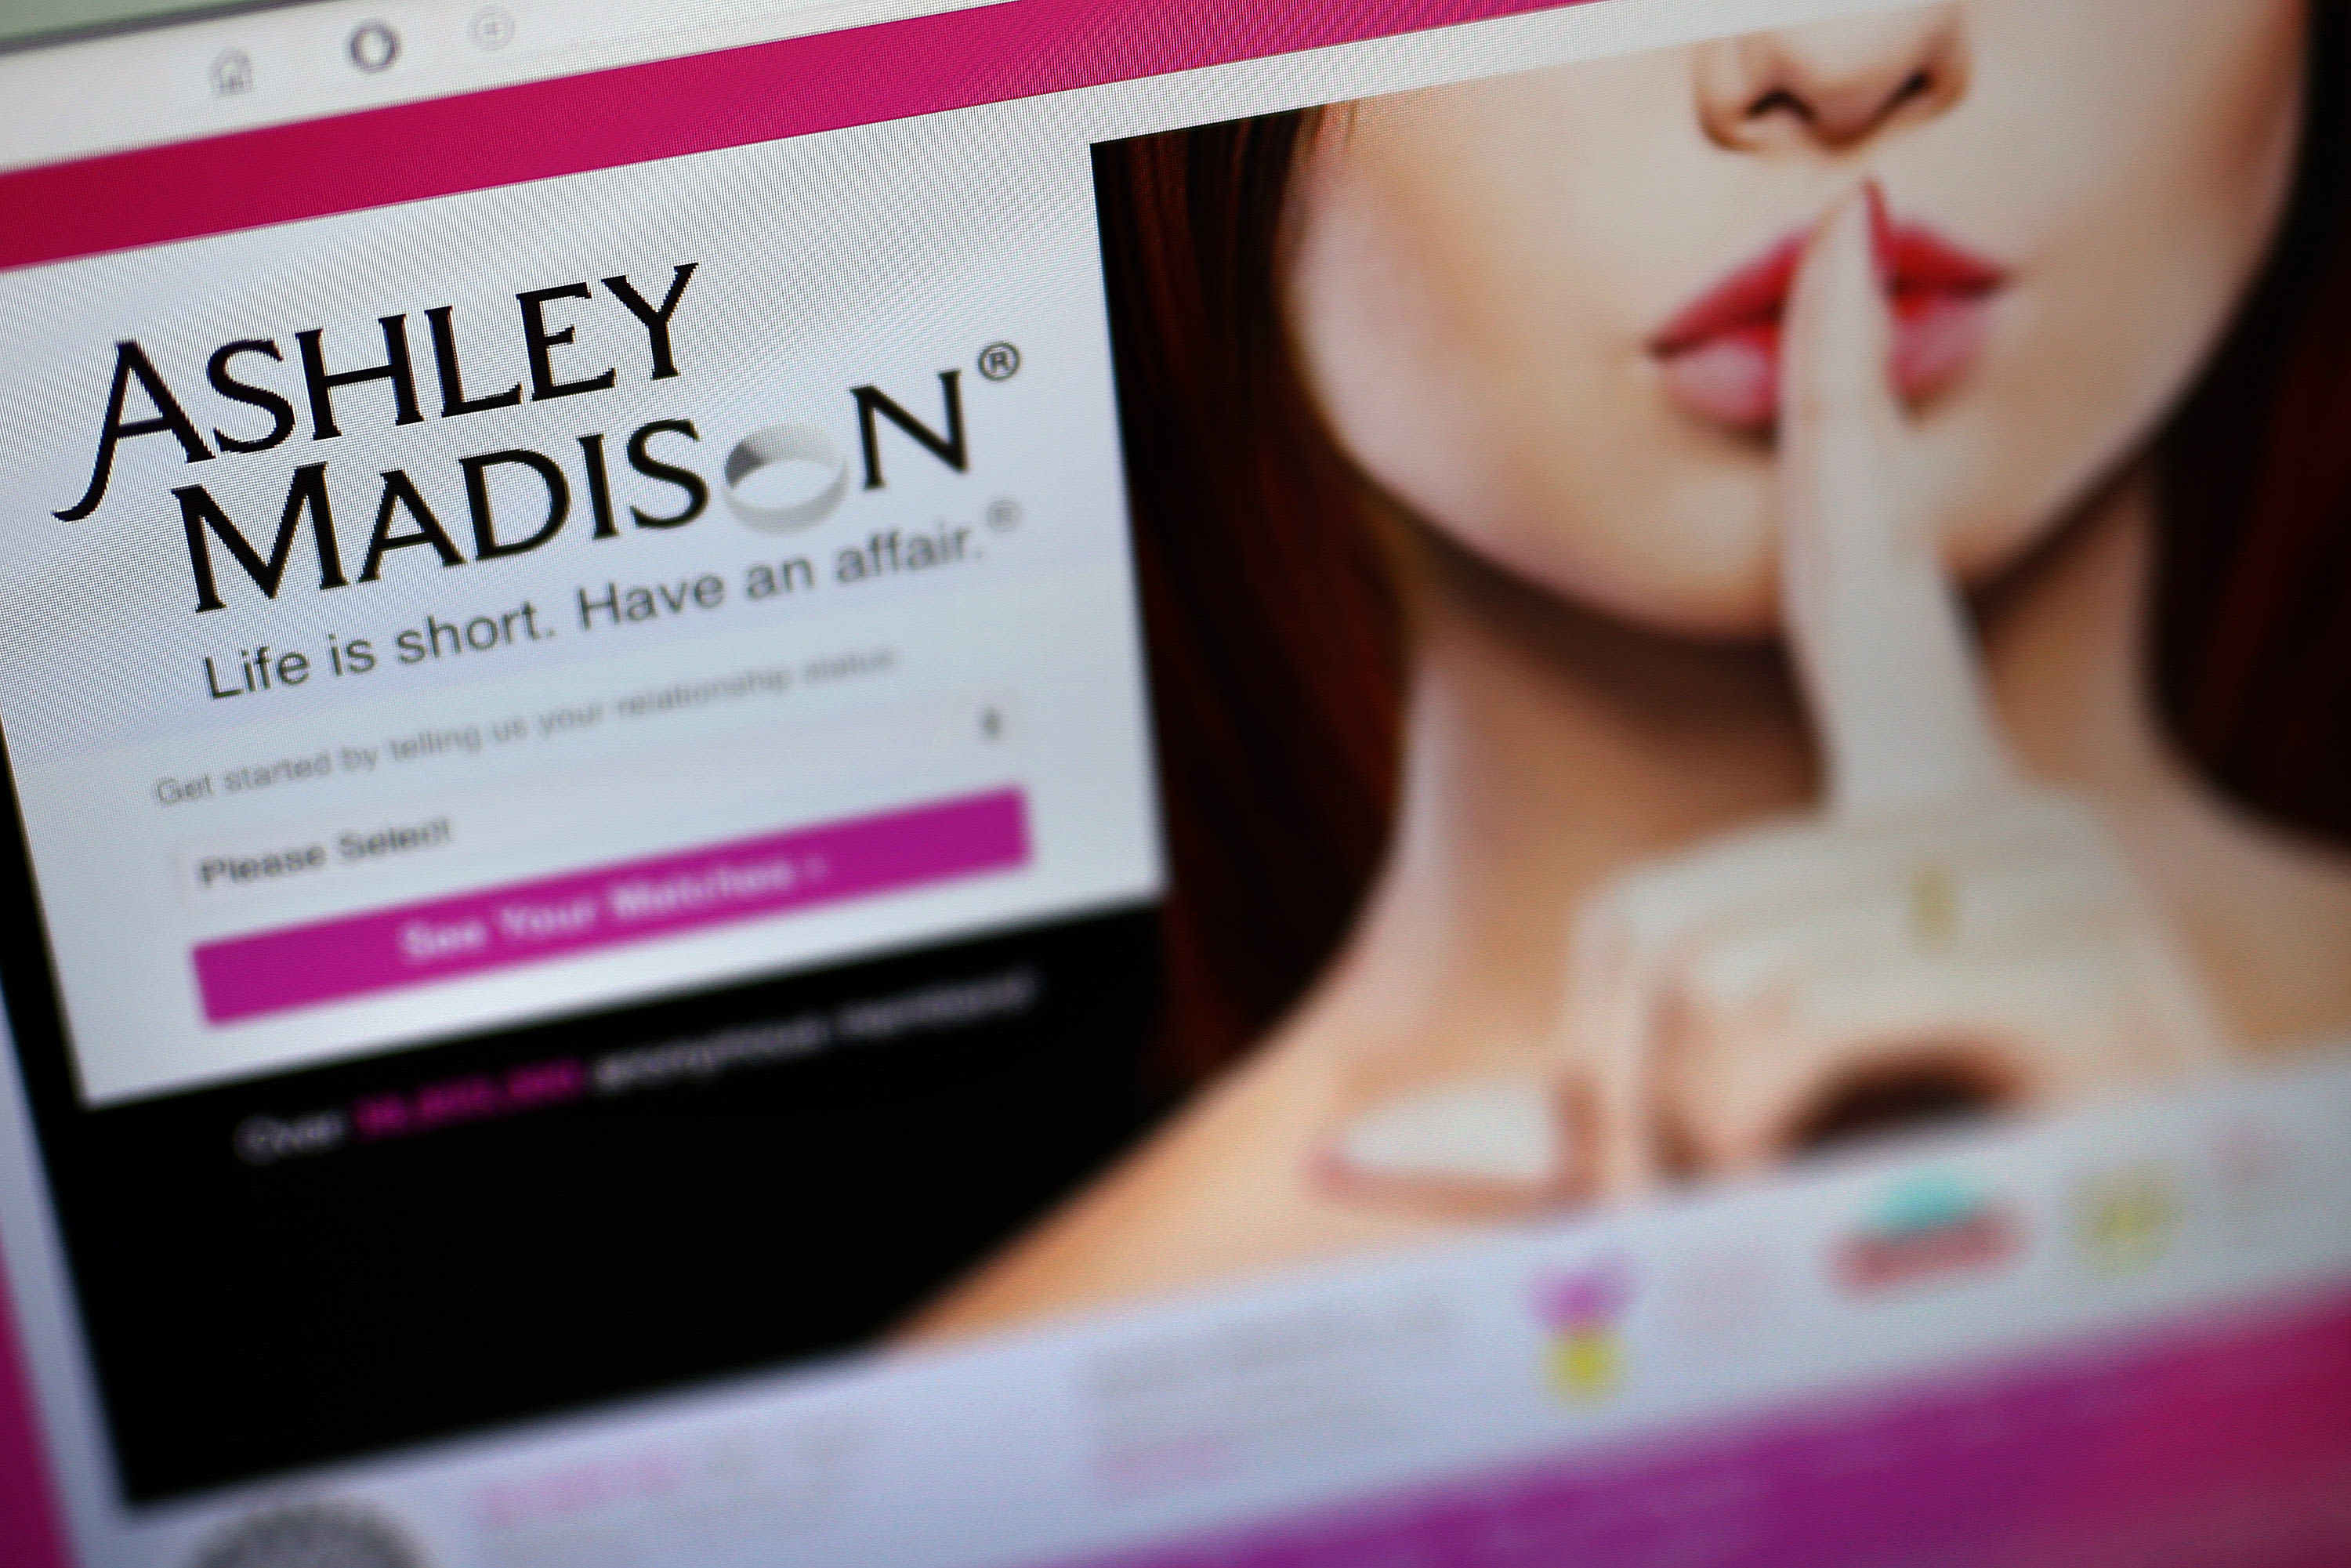 What Happened With the Ashley Madison Hack in 2015? Inside the Netflix Documentary